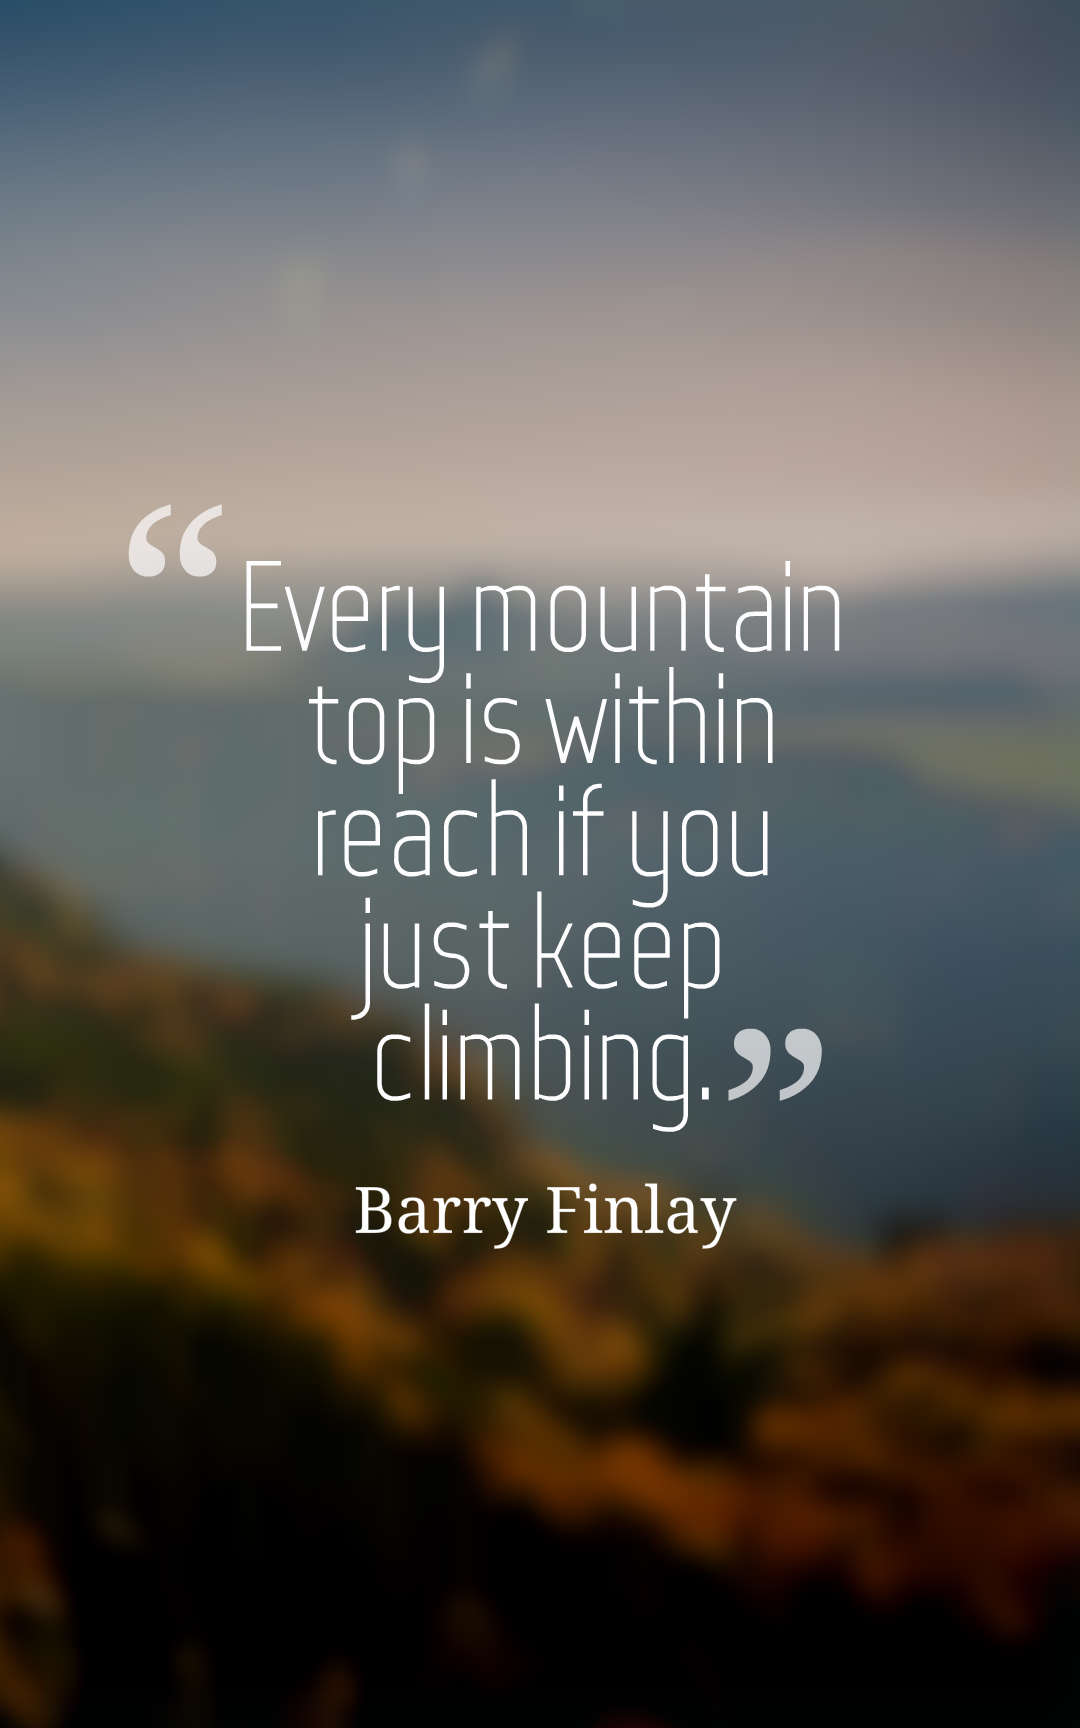 Every mountain top is within reach if you just keep climbing.